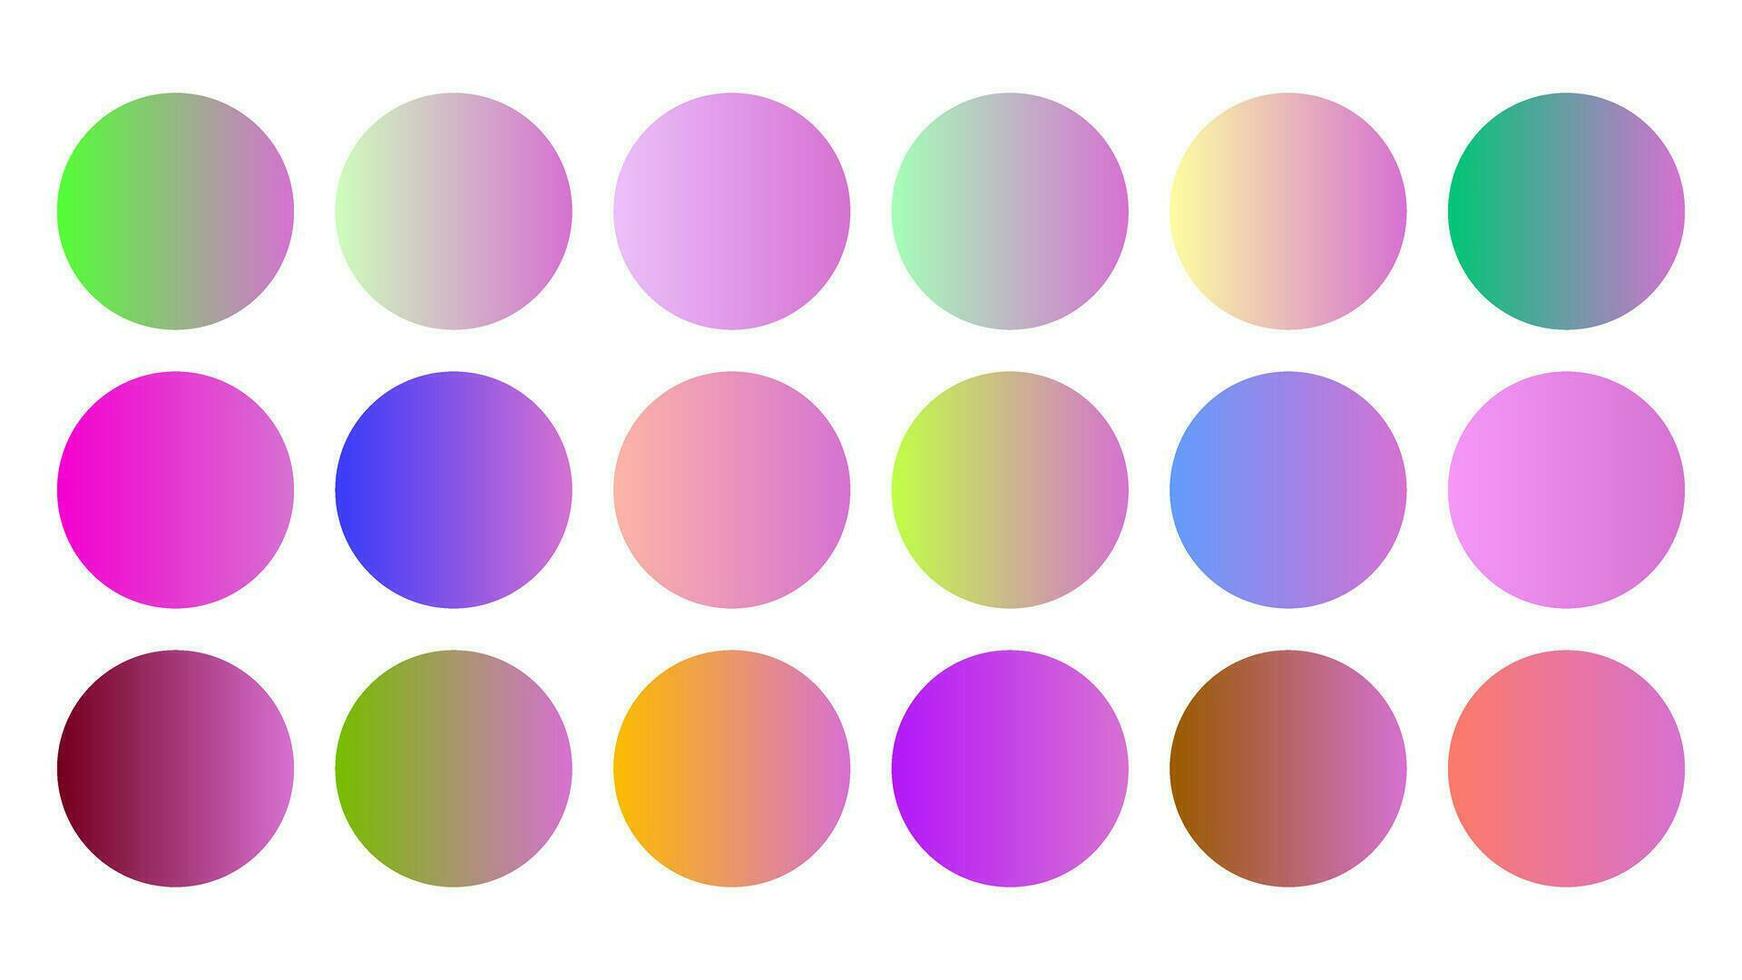 Colorful Orchid Color Shade Linear Gradient Palette Swatches Web Kit Circles Template Set vector